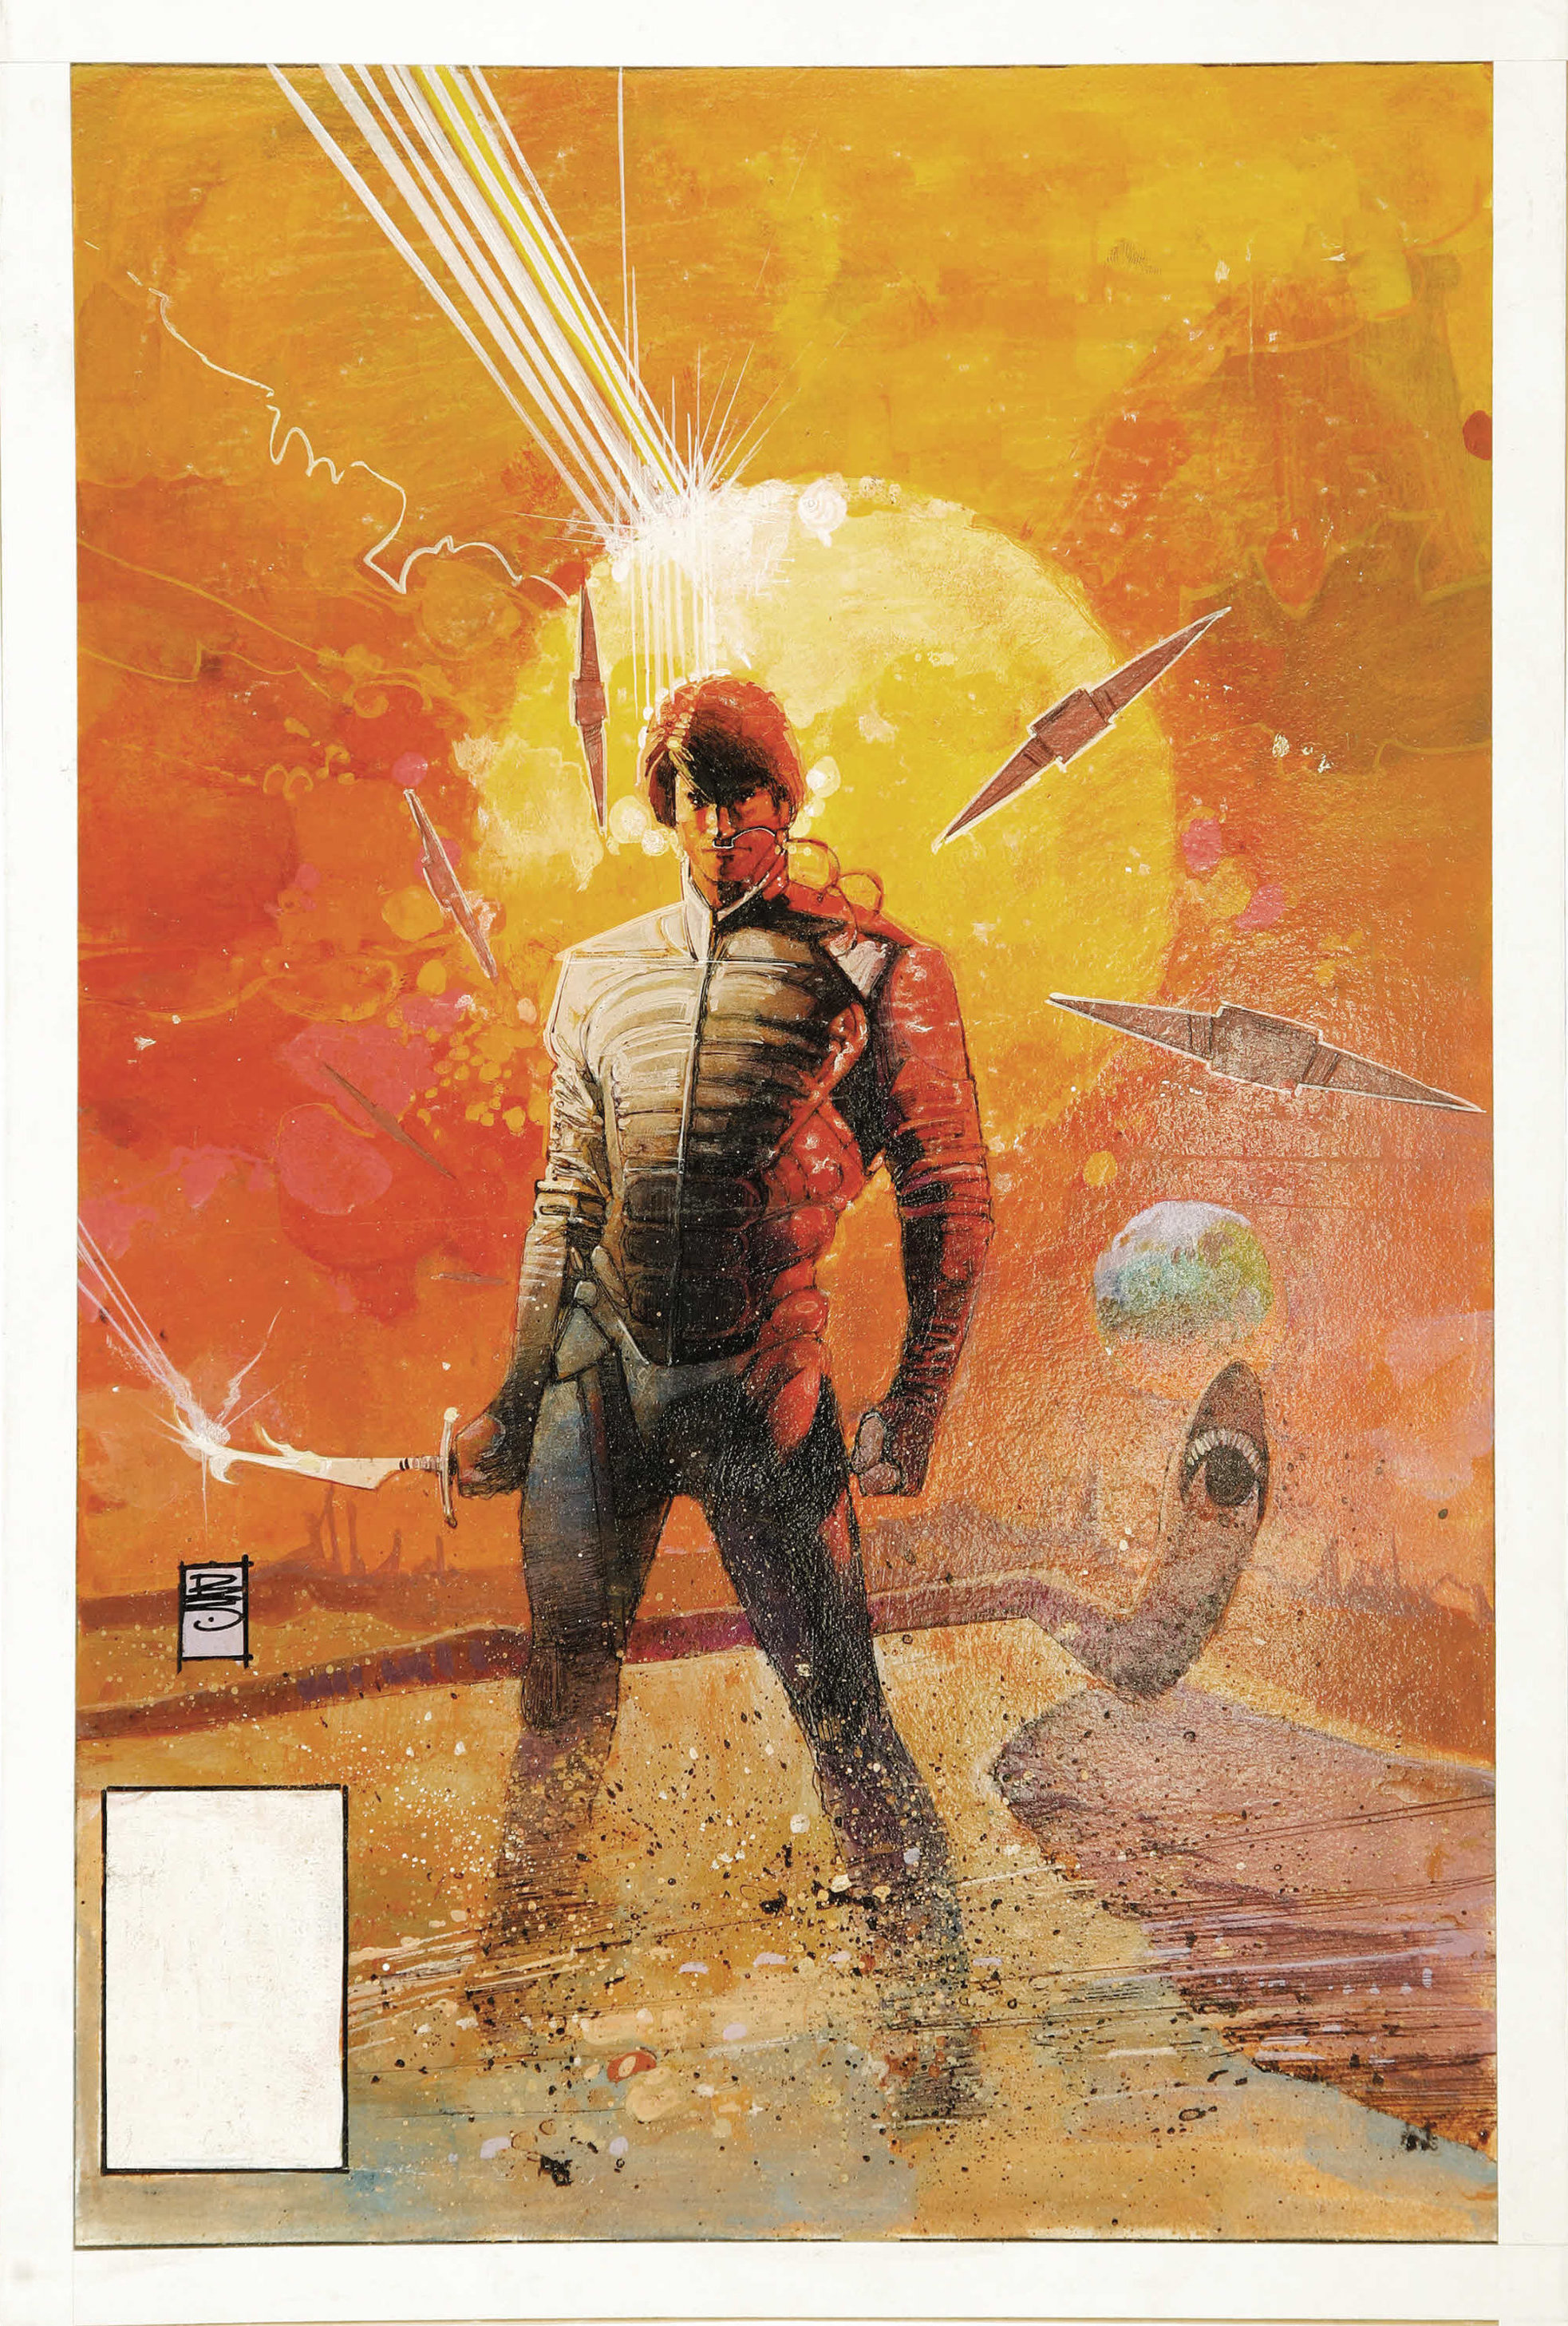 Bill Sienkiewicz - Dune the Official Comic Book Paperback Cover (1984)